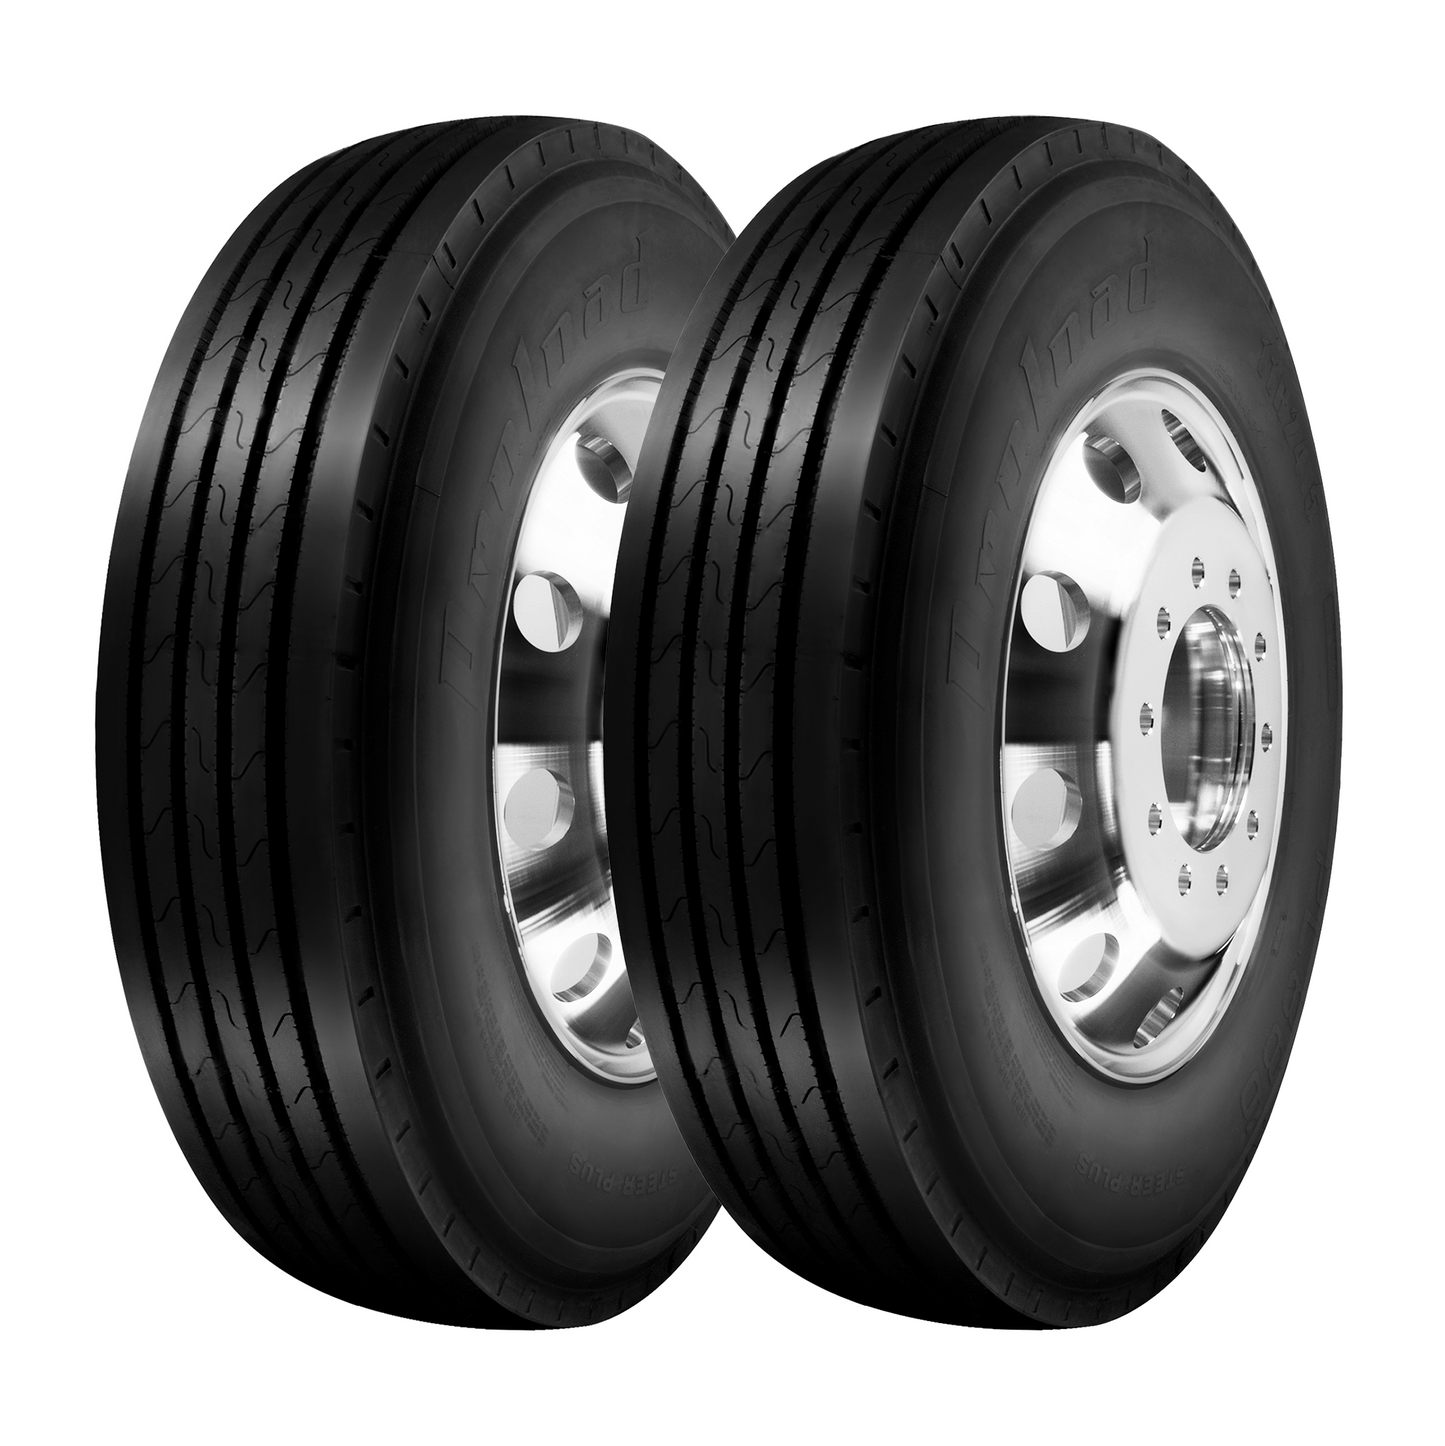 11R 24.5 16 PR Trailer Truck Tire All Position with 24.5 x 8.25 Wheel (Mounted)